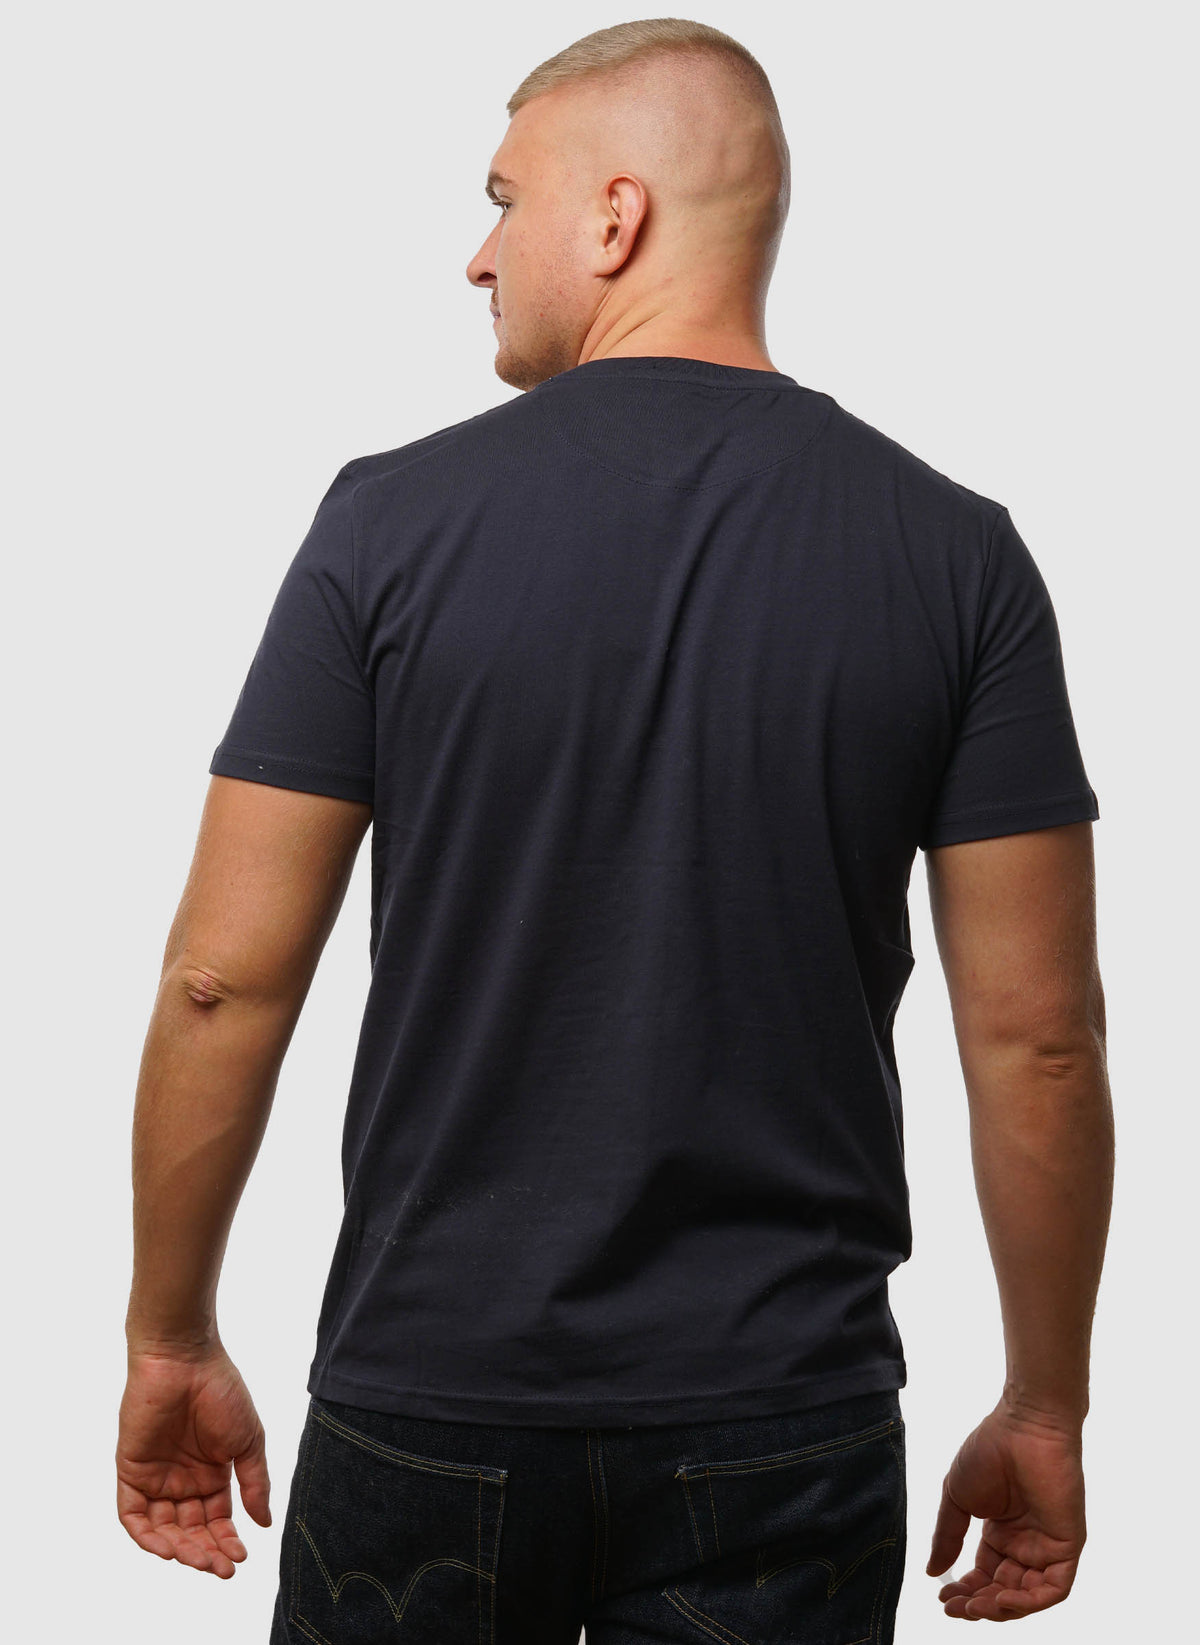 Dygas T-Shirt - Navy/House Check